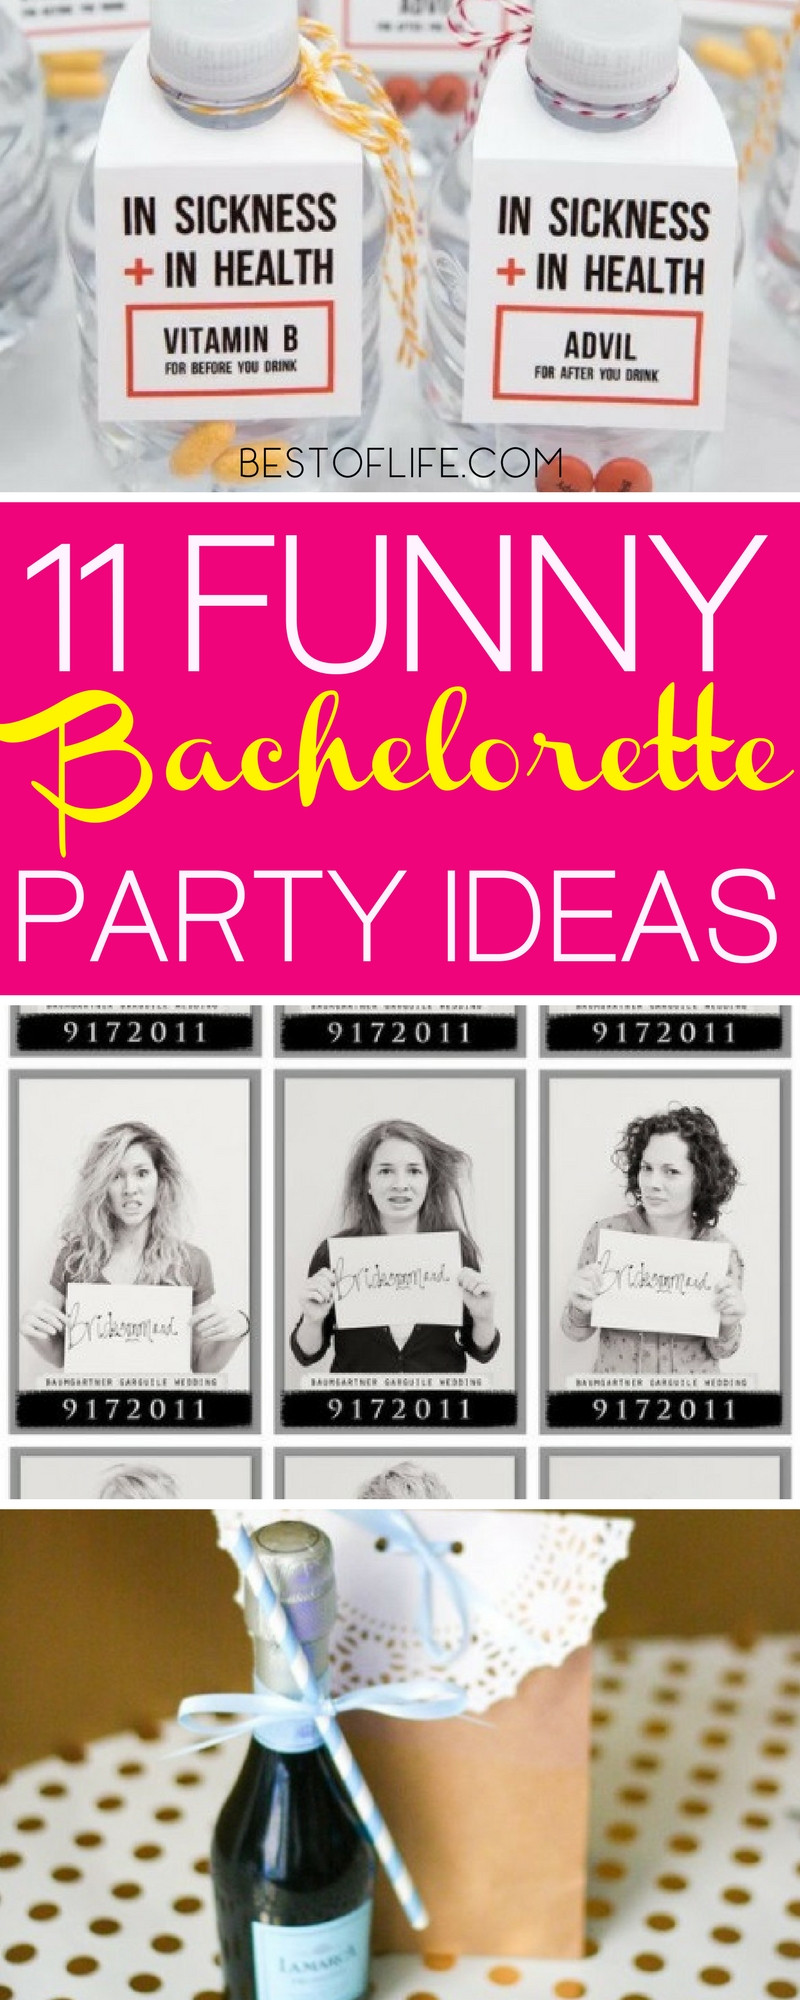 Reddit Bachelorette Party Ideas
 11 Funny Bachelorette Party Ideas and Games The Best of Life